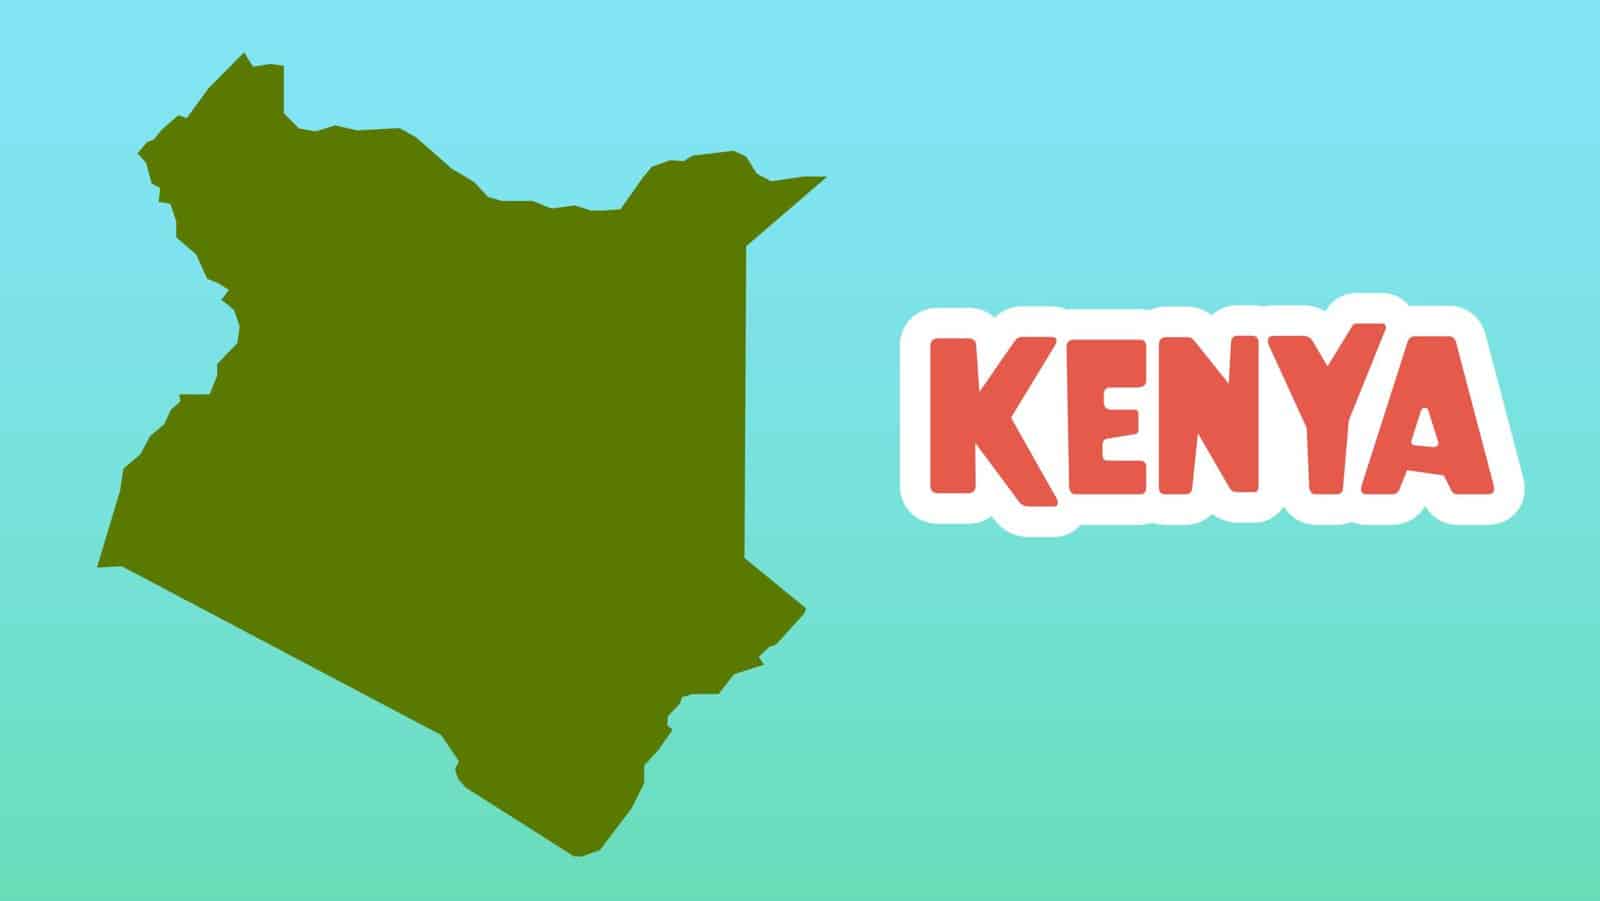 Kenya Facts for Kids – 5 Cool Facts about Kenya